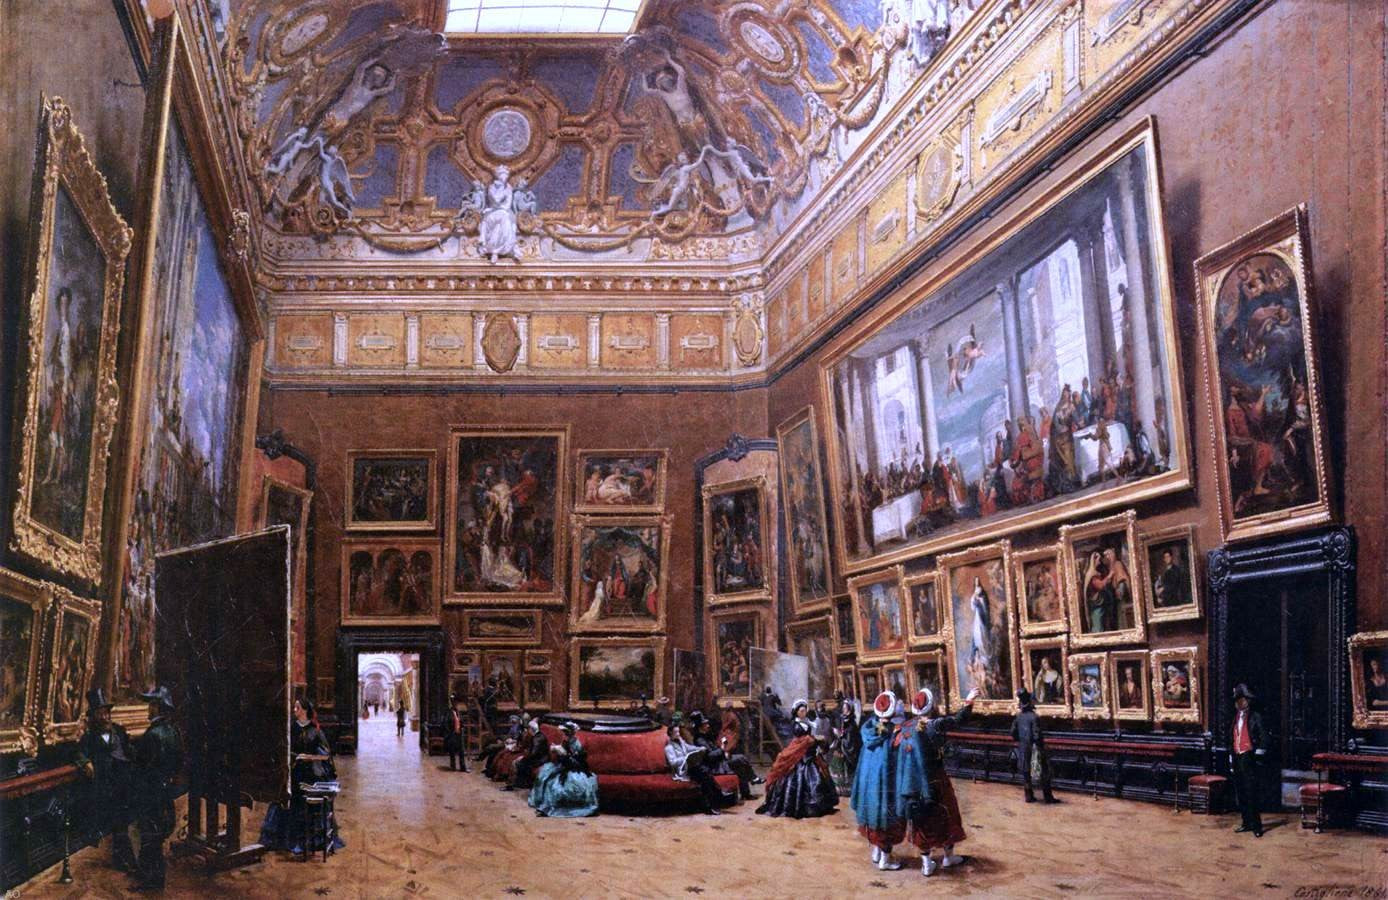  Giuseppe Castiglione View of the Grand Salon Carre in the Louvre - Hand Painted Oil Painting